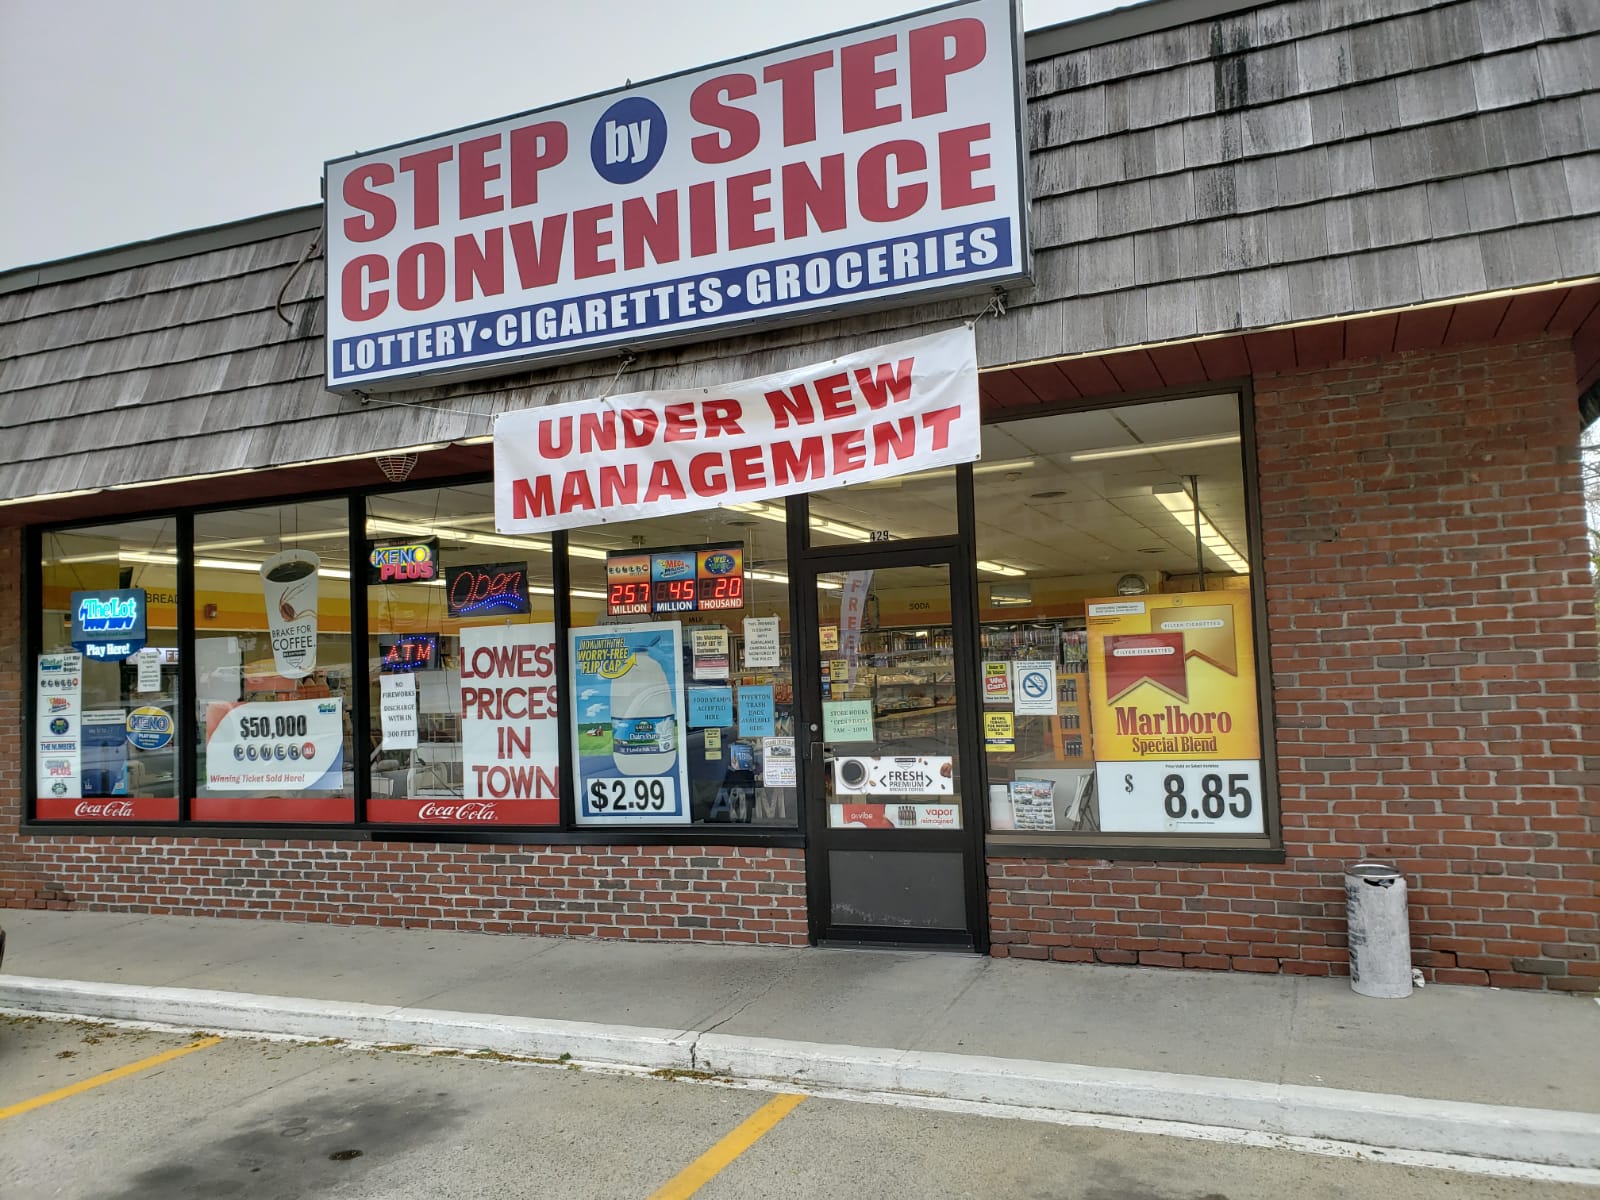 Step By Step Convenience